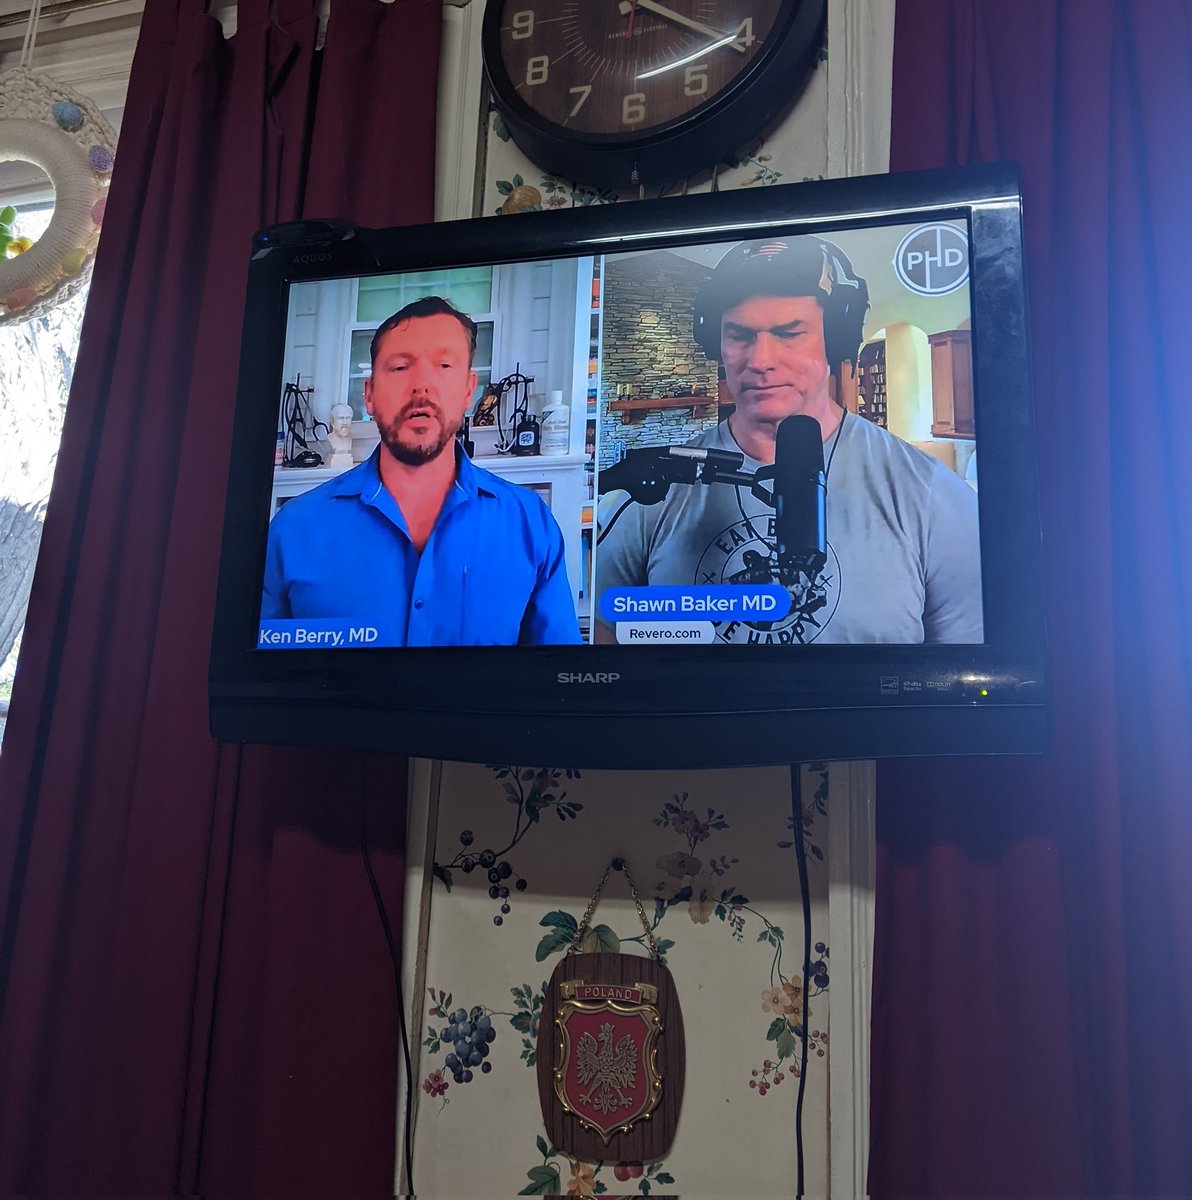 Dr Shawn @SBakerMD and Dr Ken @KenDBerryMD together on YouTube is exciting.

Dr Shawn talking about Revero bringing back trust and integrity back to health care is even more exciting.

Dr Ken talking about starting a real honest alternative to the fake ass American Diabetes